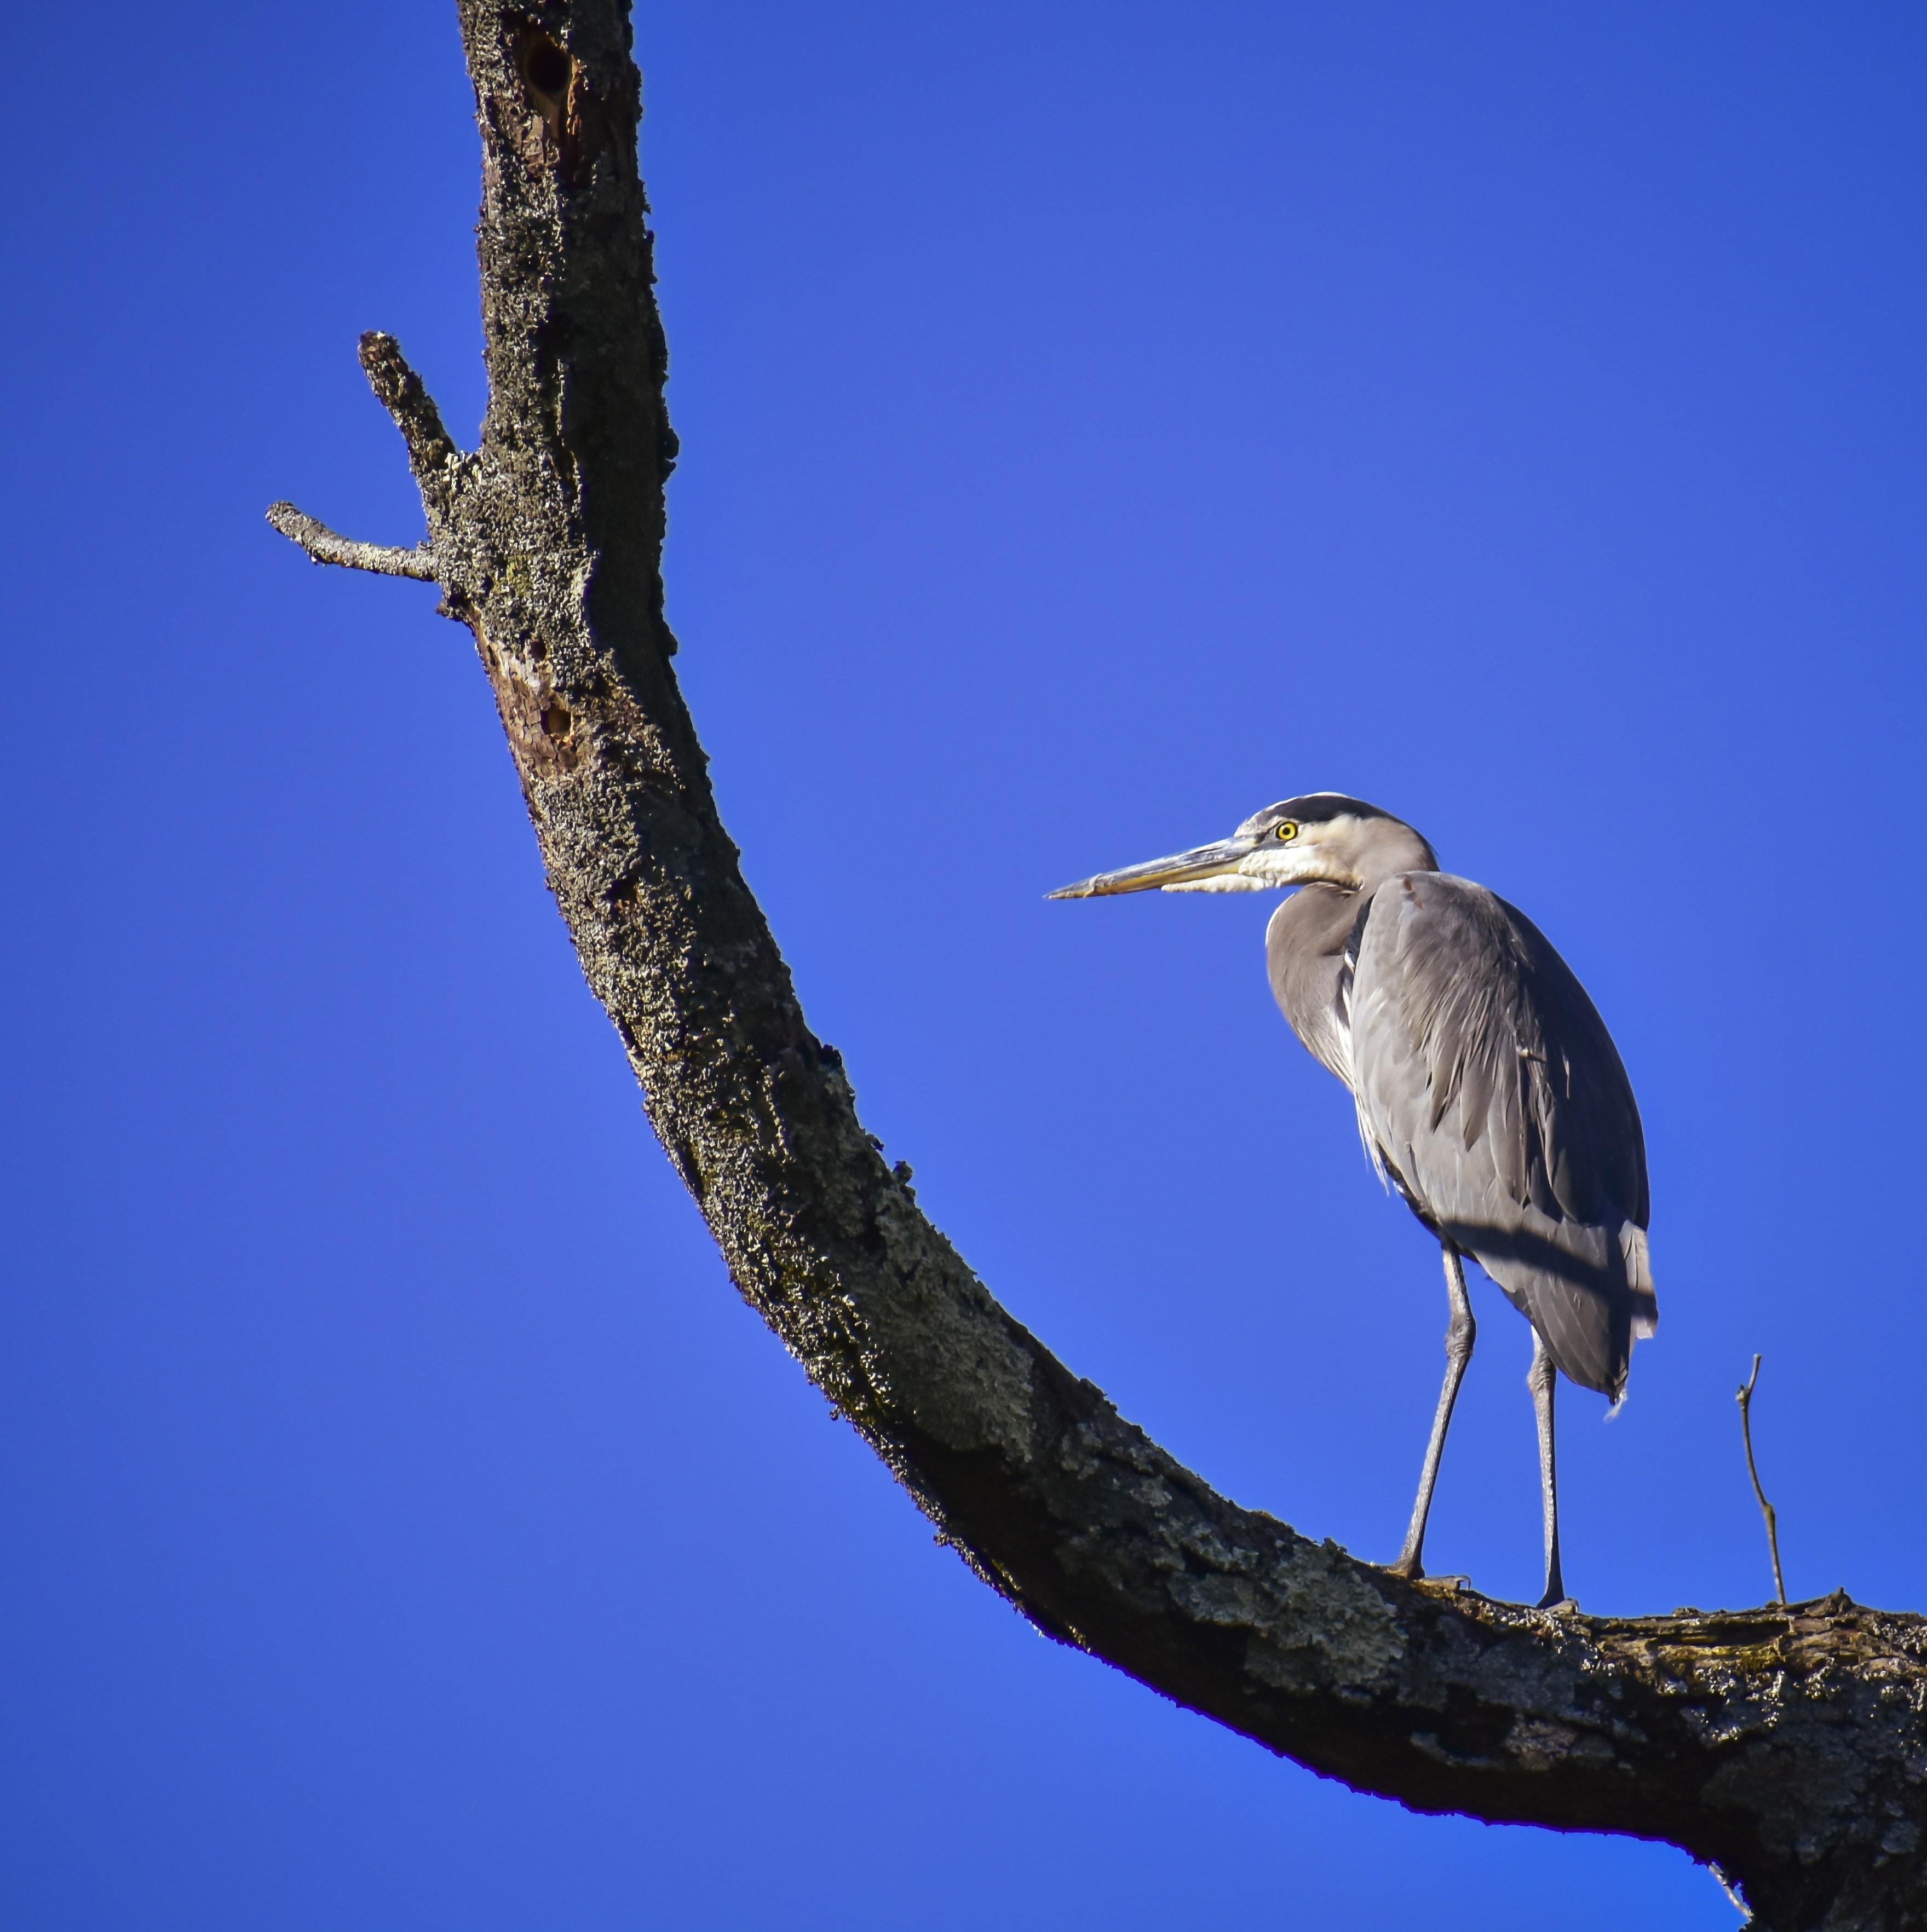 Is a heron a herbivore or carnivore? 